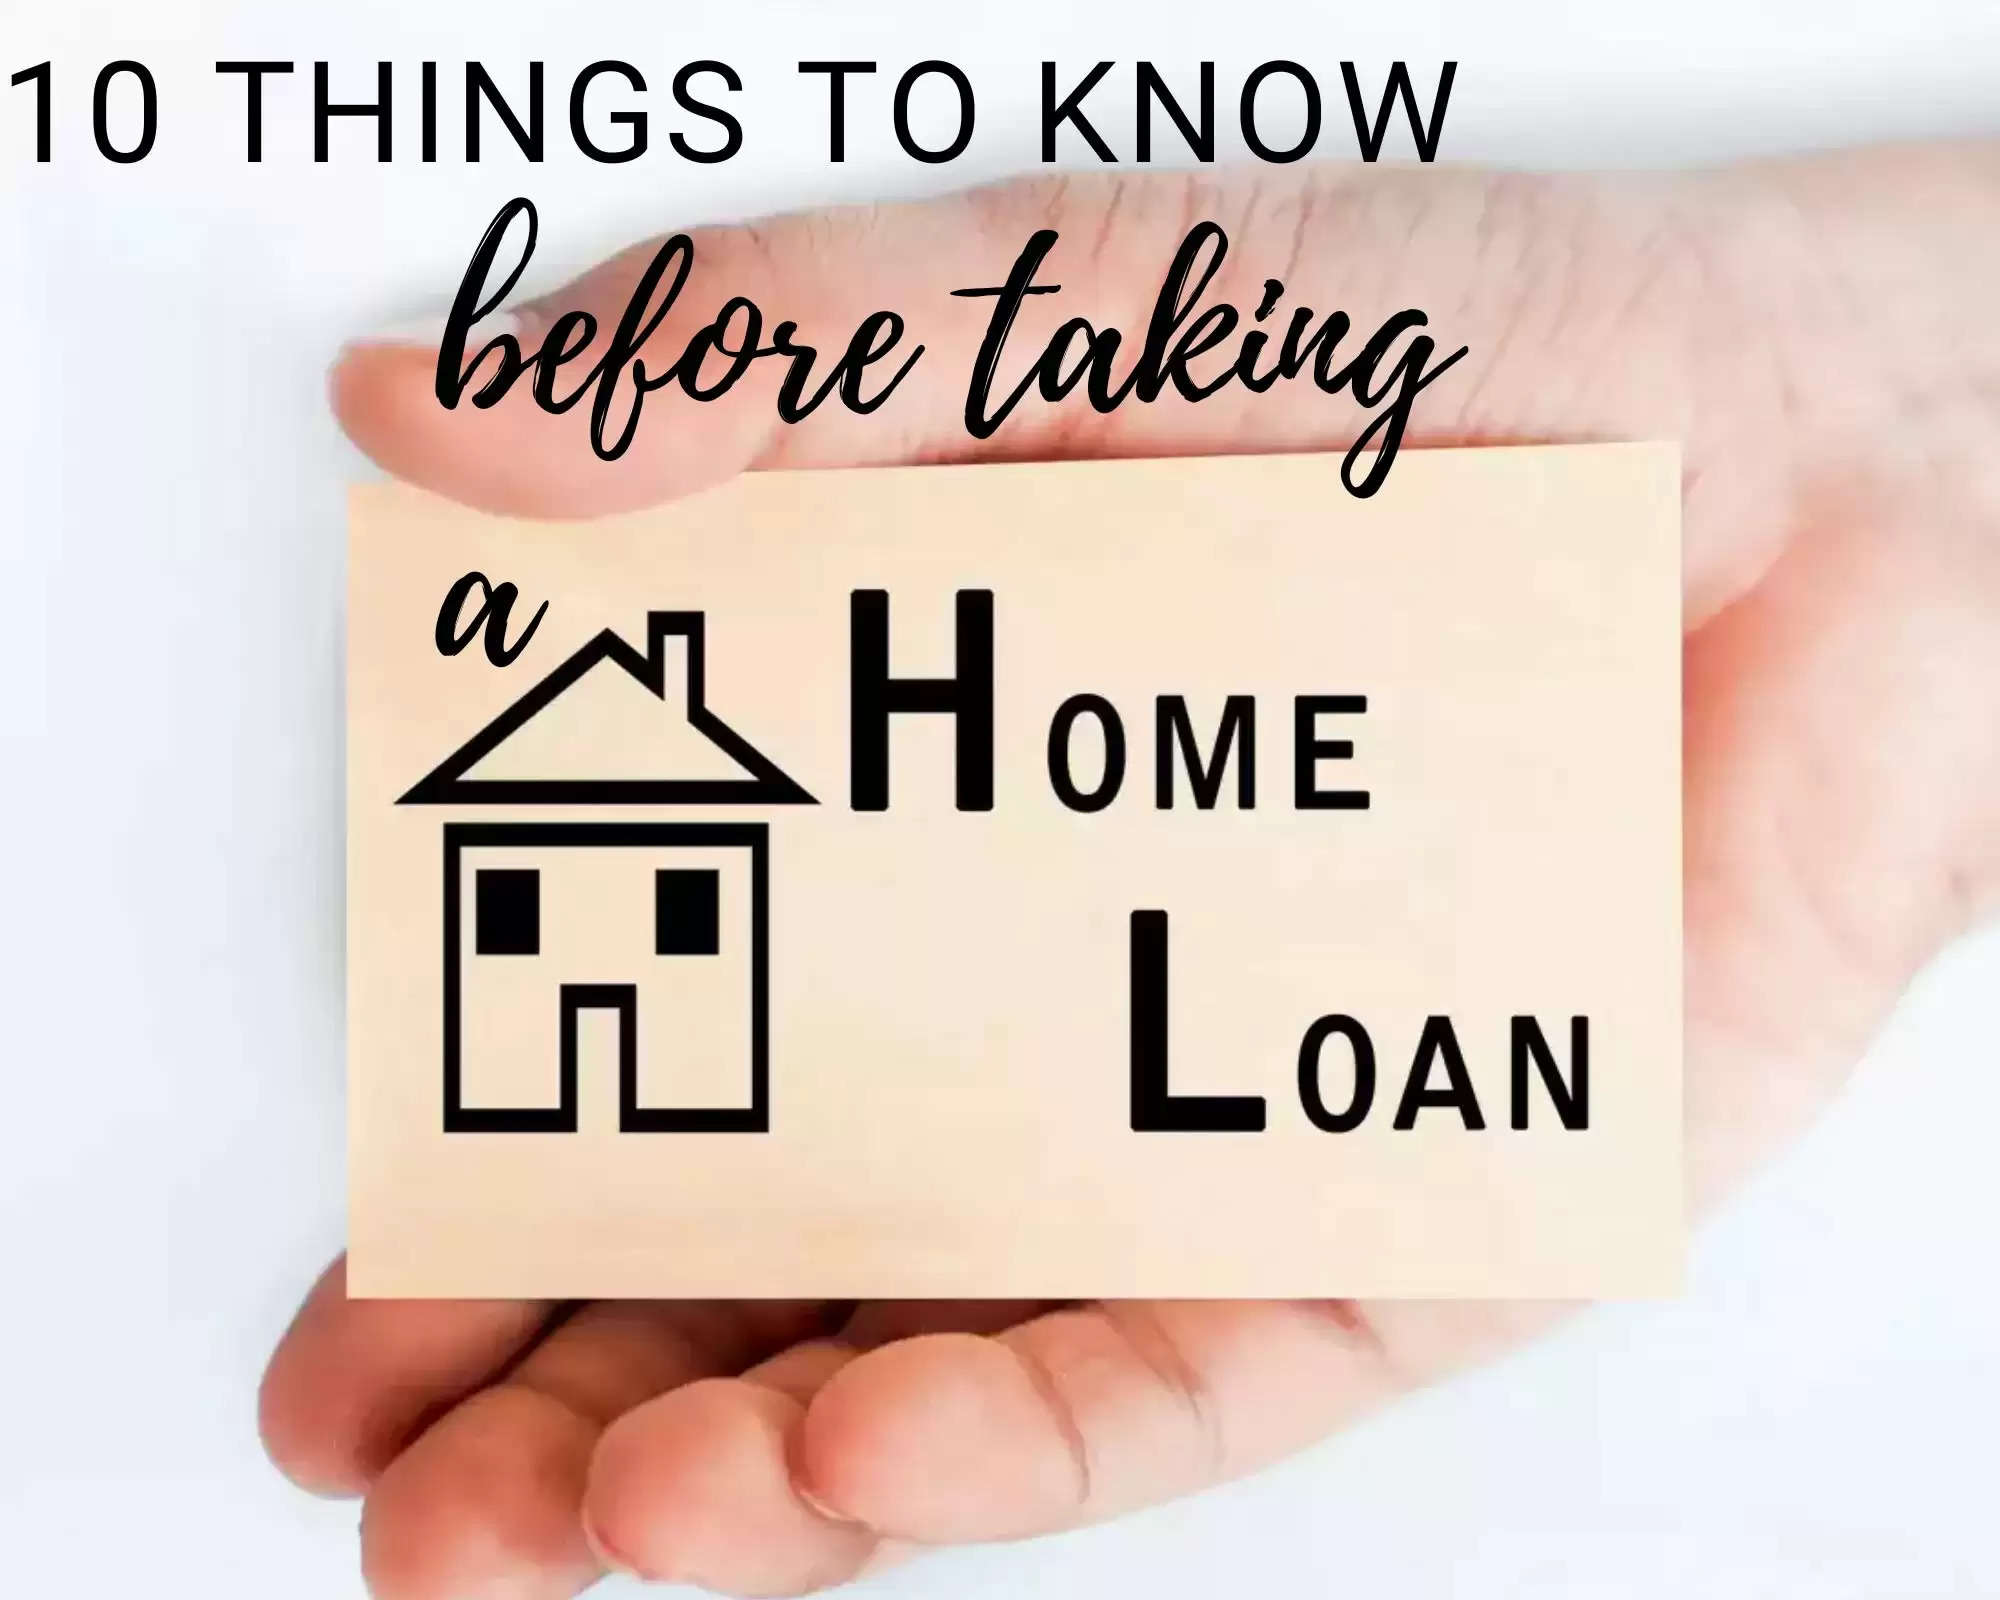 10 Things to Know before Taking a Home Loan